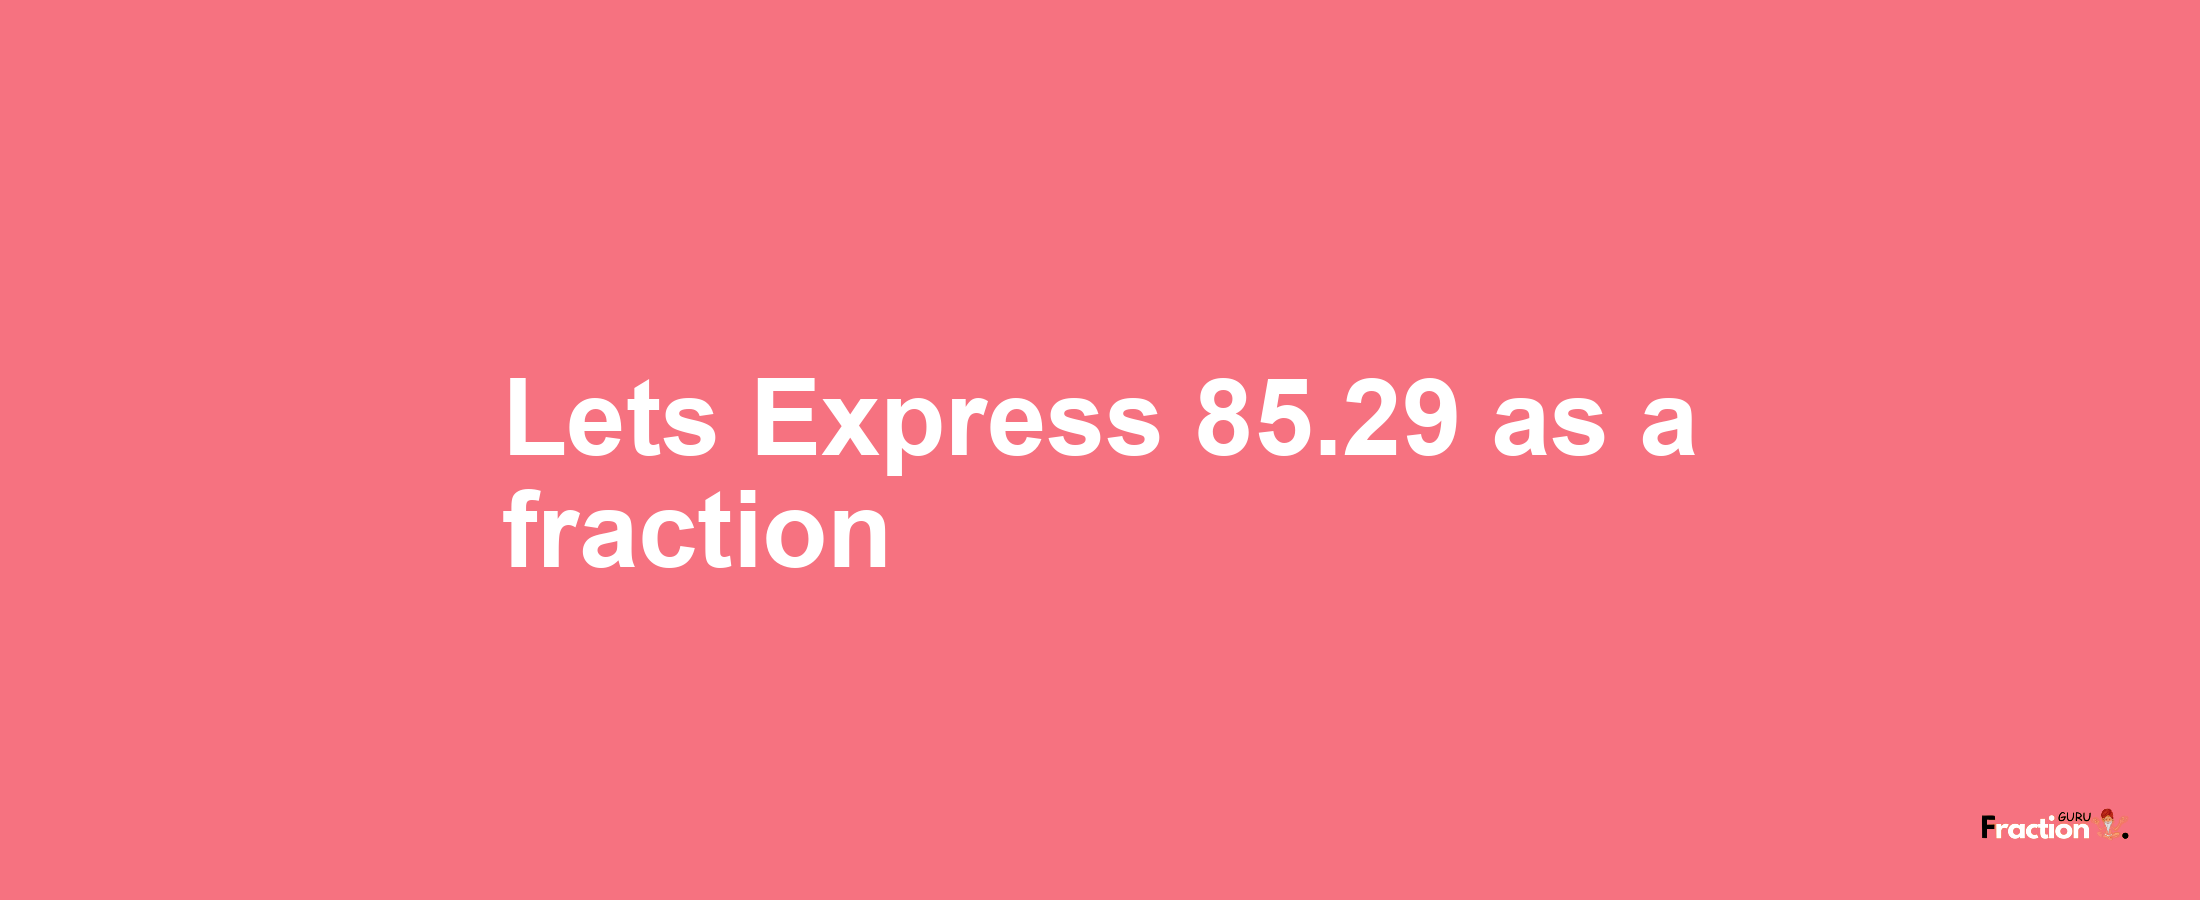 Lets Express 85.29 as afraction